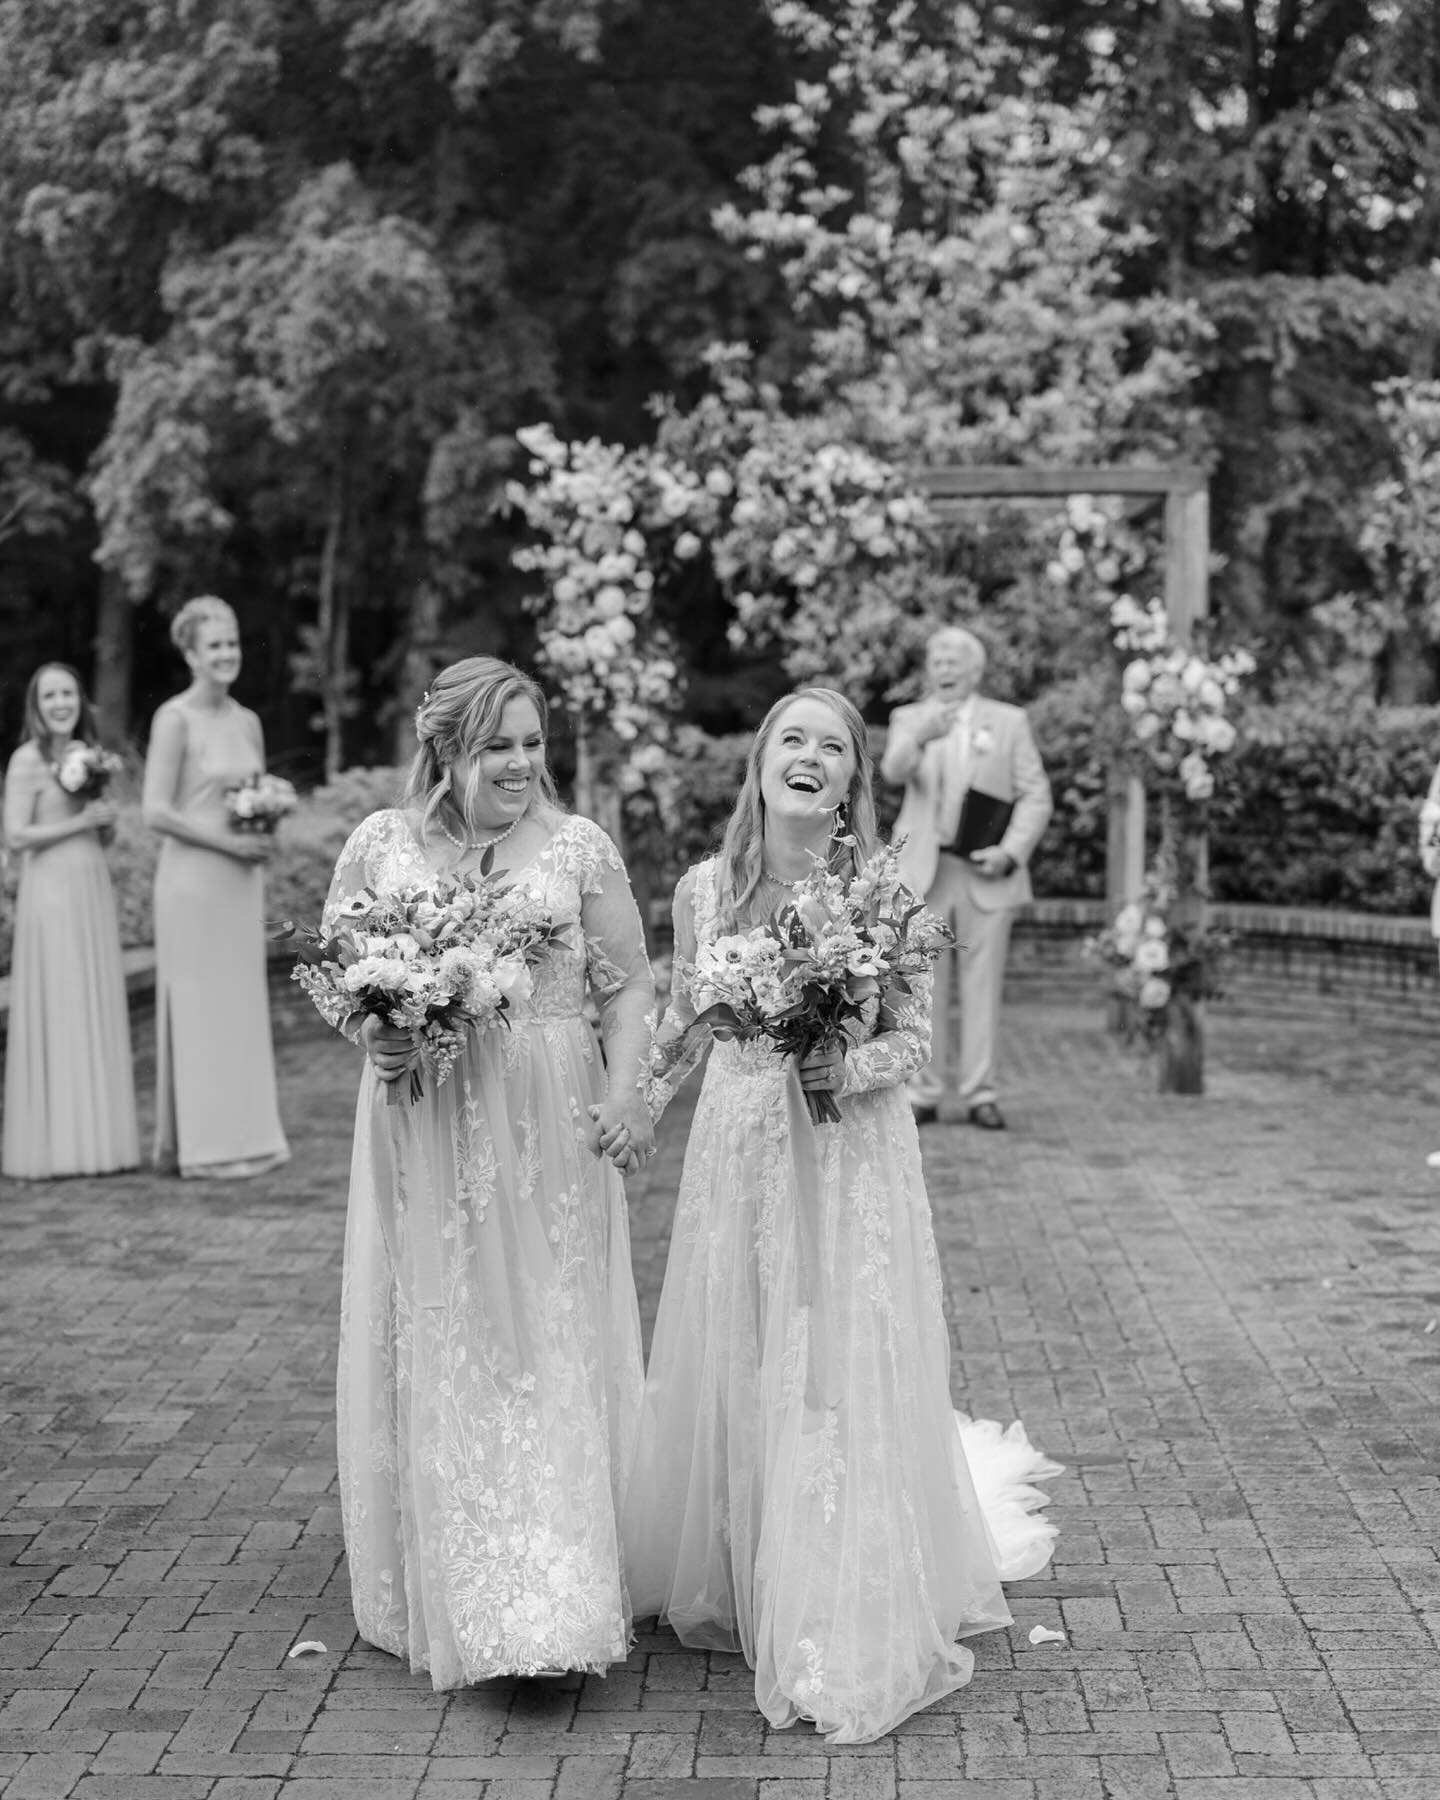 Cheers to the Youngbloods! 🥂

Courtney and Kristin tied the knot on Saturday and like most weddings that day, the rain created a few obstacles. BUT these two kept great spirits and their families and friends surrounded them with love. Despite the ra